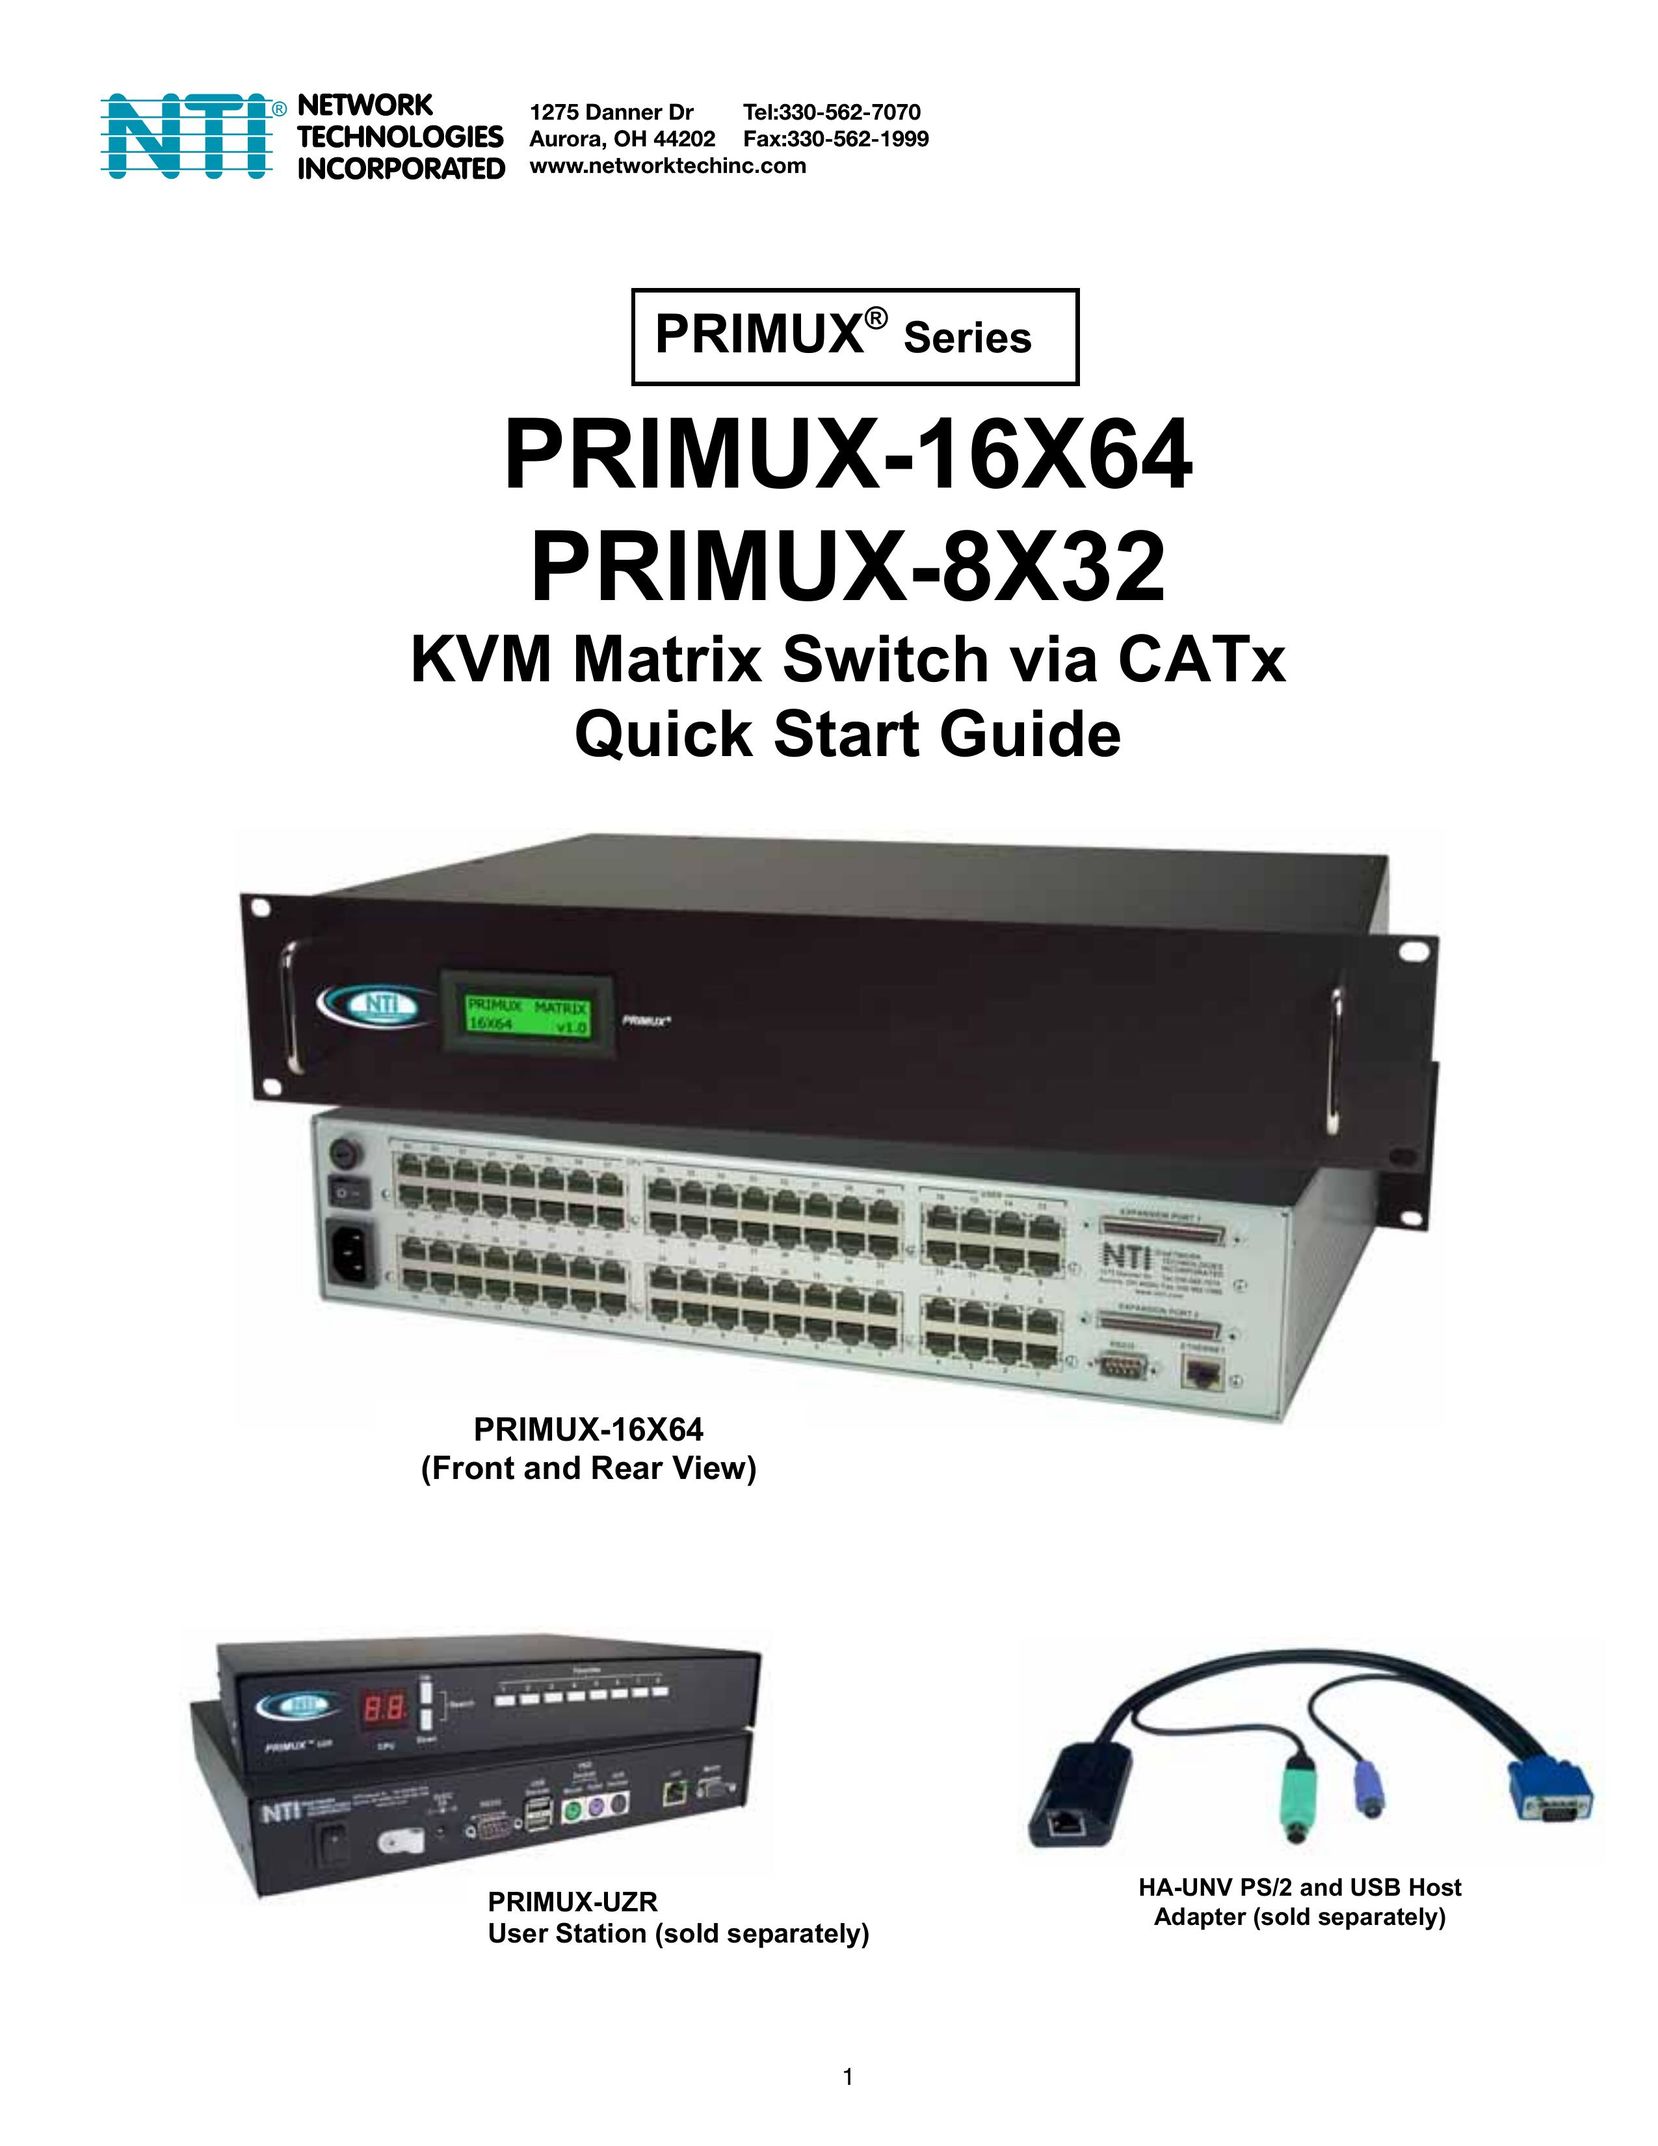 Network Technologies Primus-16X64 Switch User Manual